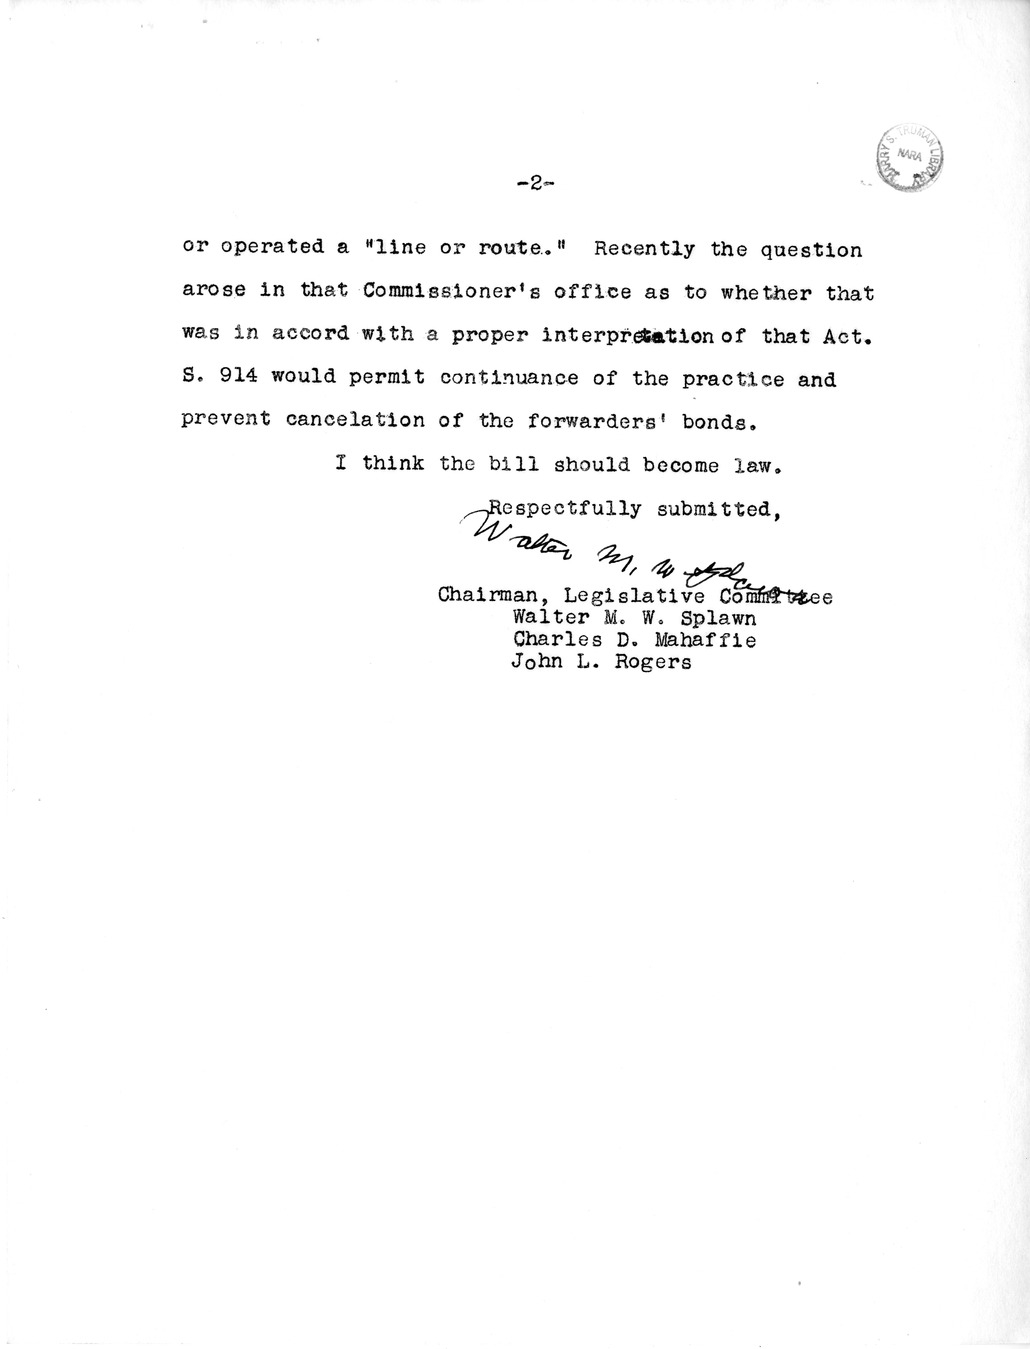 Memorandum from Frederick J. Bailey to M. C. Latta, S. 914, To Amend the Tariff Act of 1930, as Amended, so as to Permit the Designation of Freight forwarders as Carriers of Bonded Merchandise, with Attachments